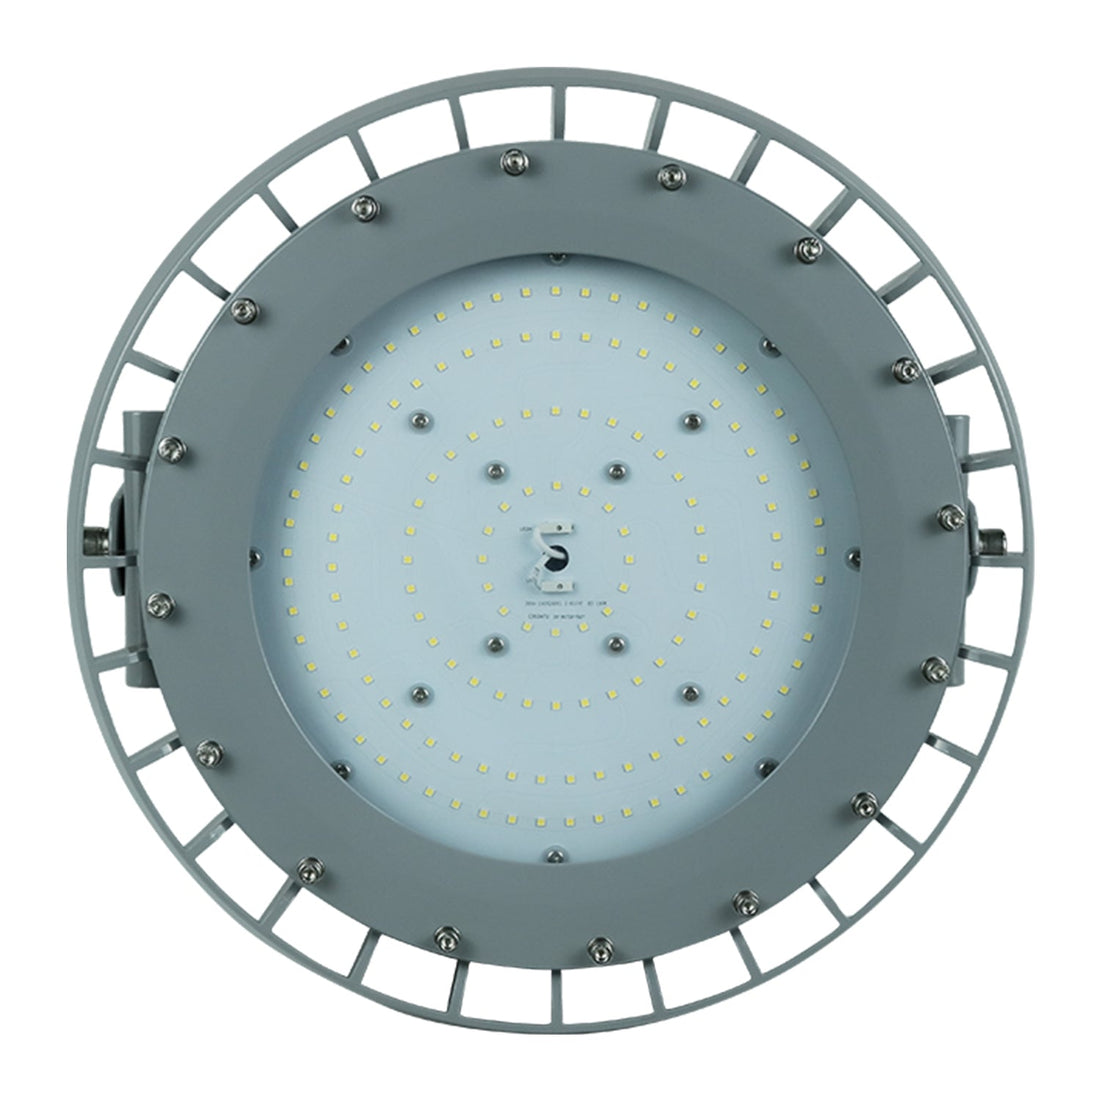 B Series 100W LED Explosion Proof Round High Bay Light - Non Dimmable, 5000K, 13500LM, IP66 Rated for Hazardous Locations